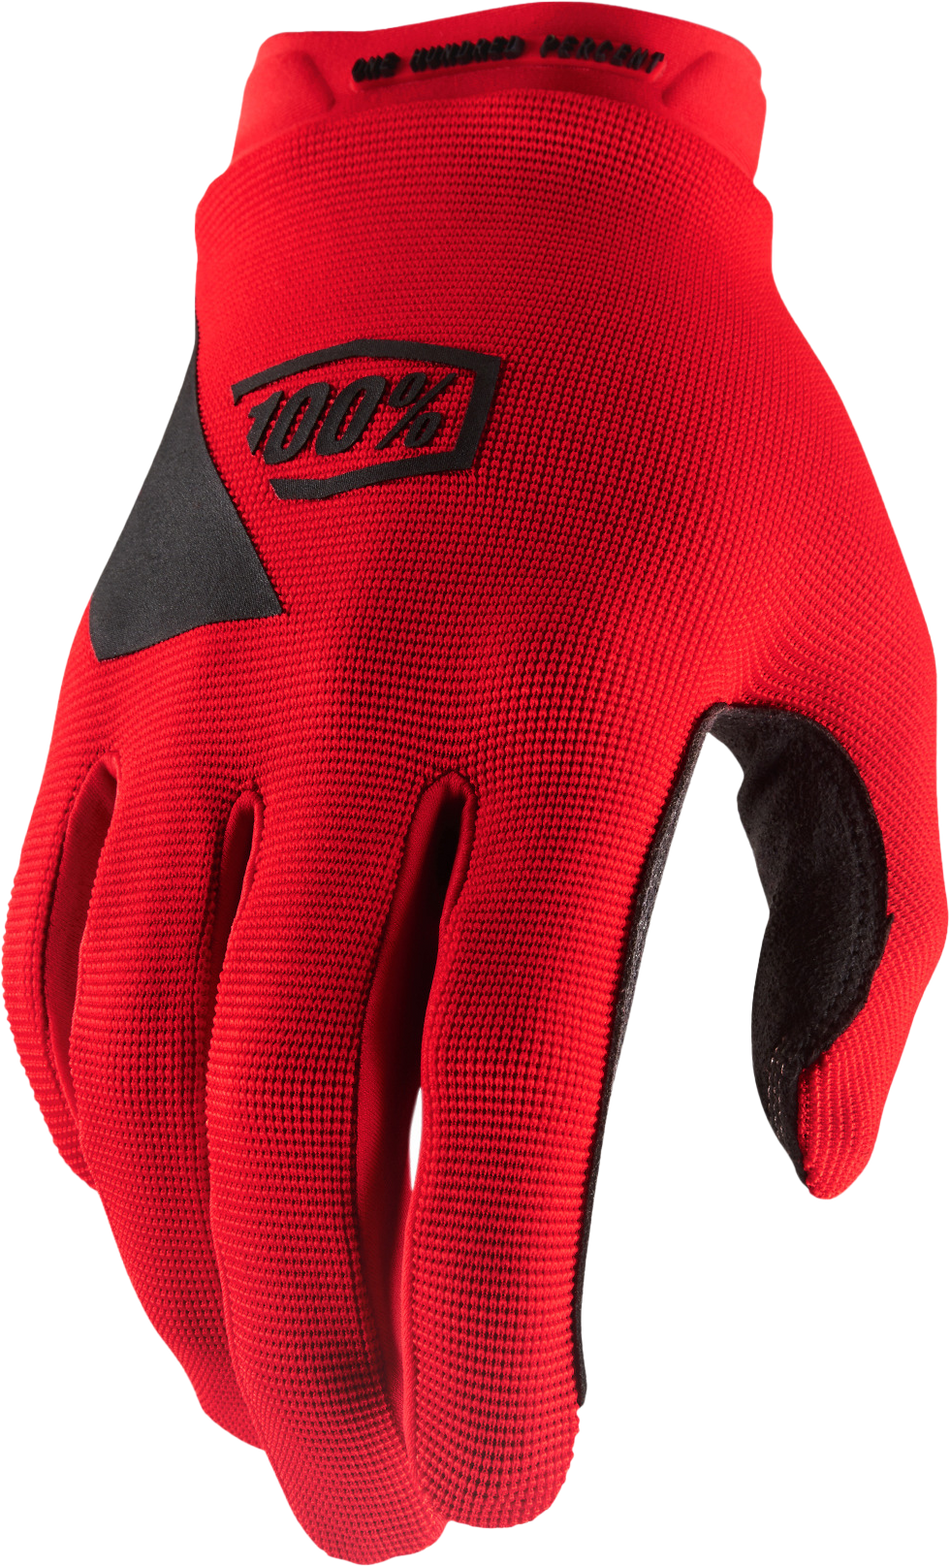 100% Ridecamp Youth Gloves Red Sm 10012-00004